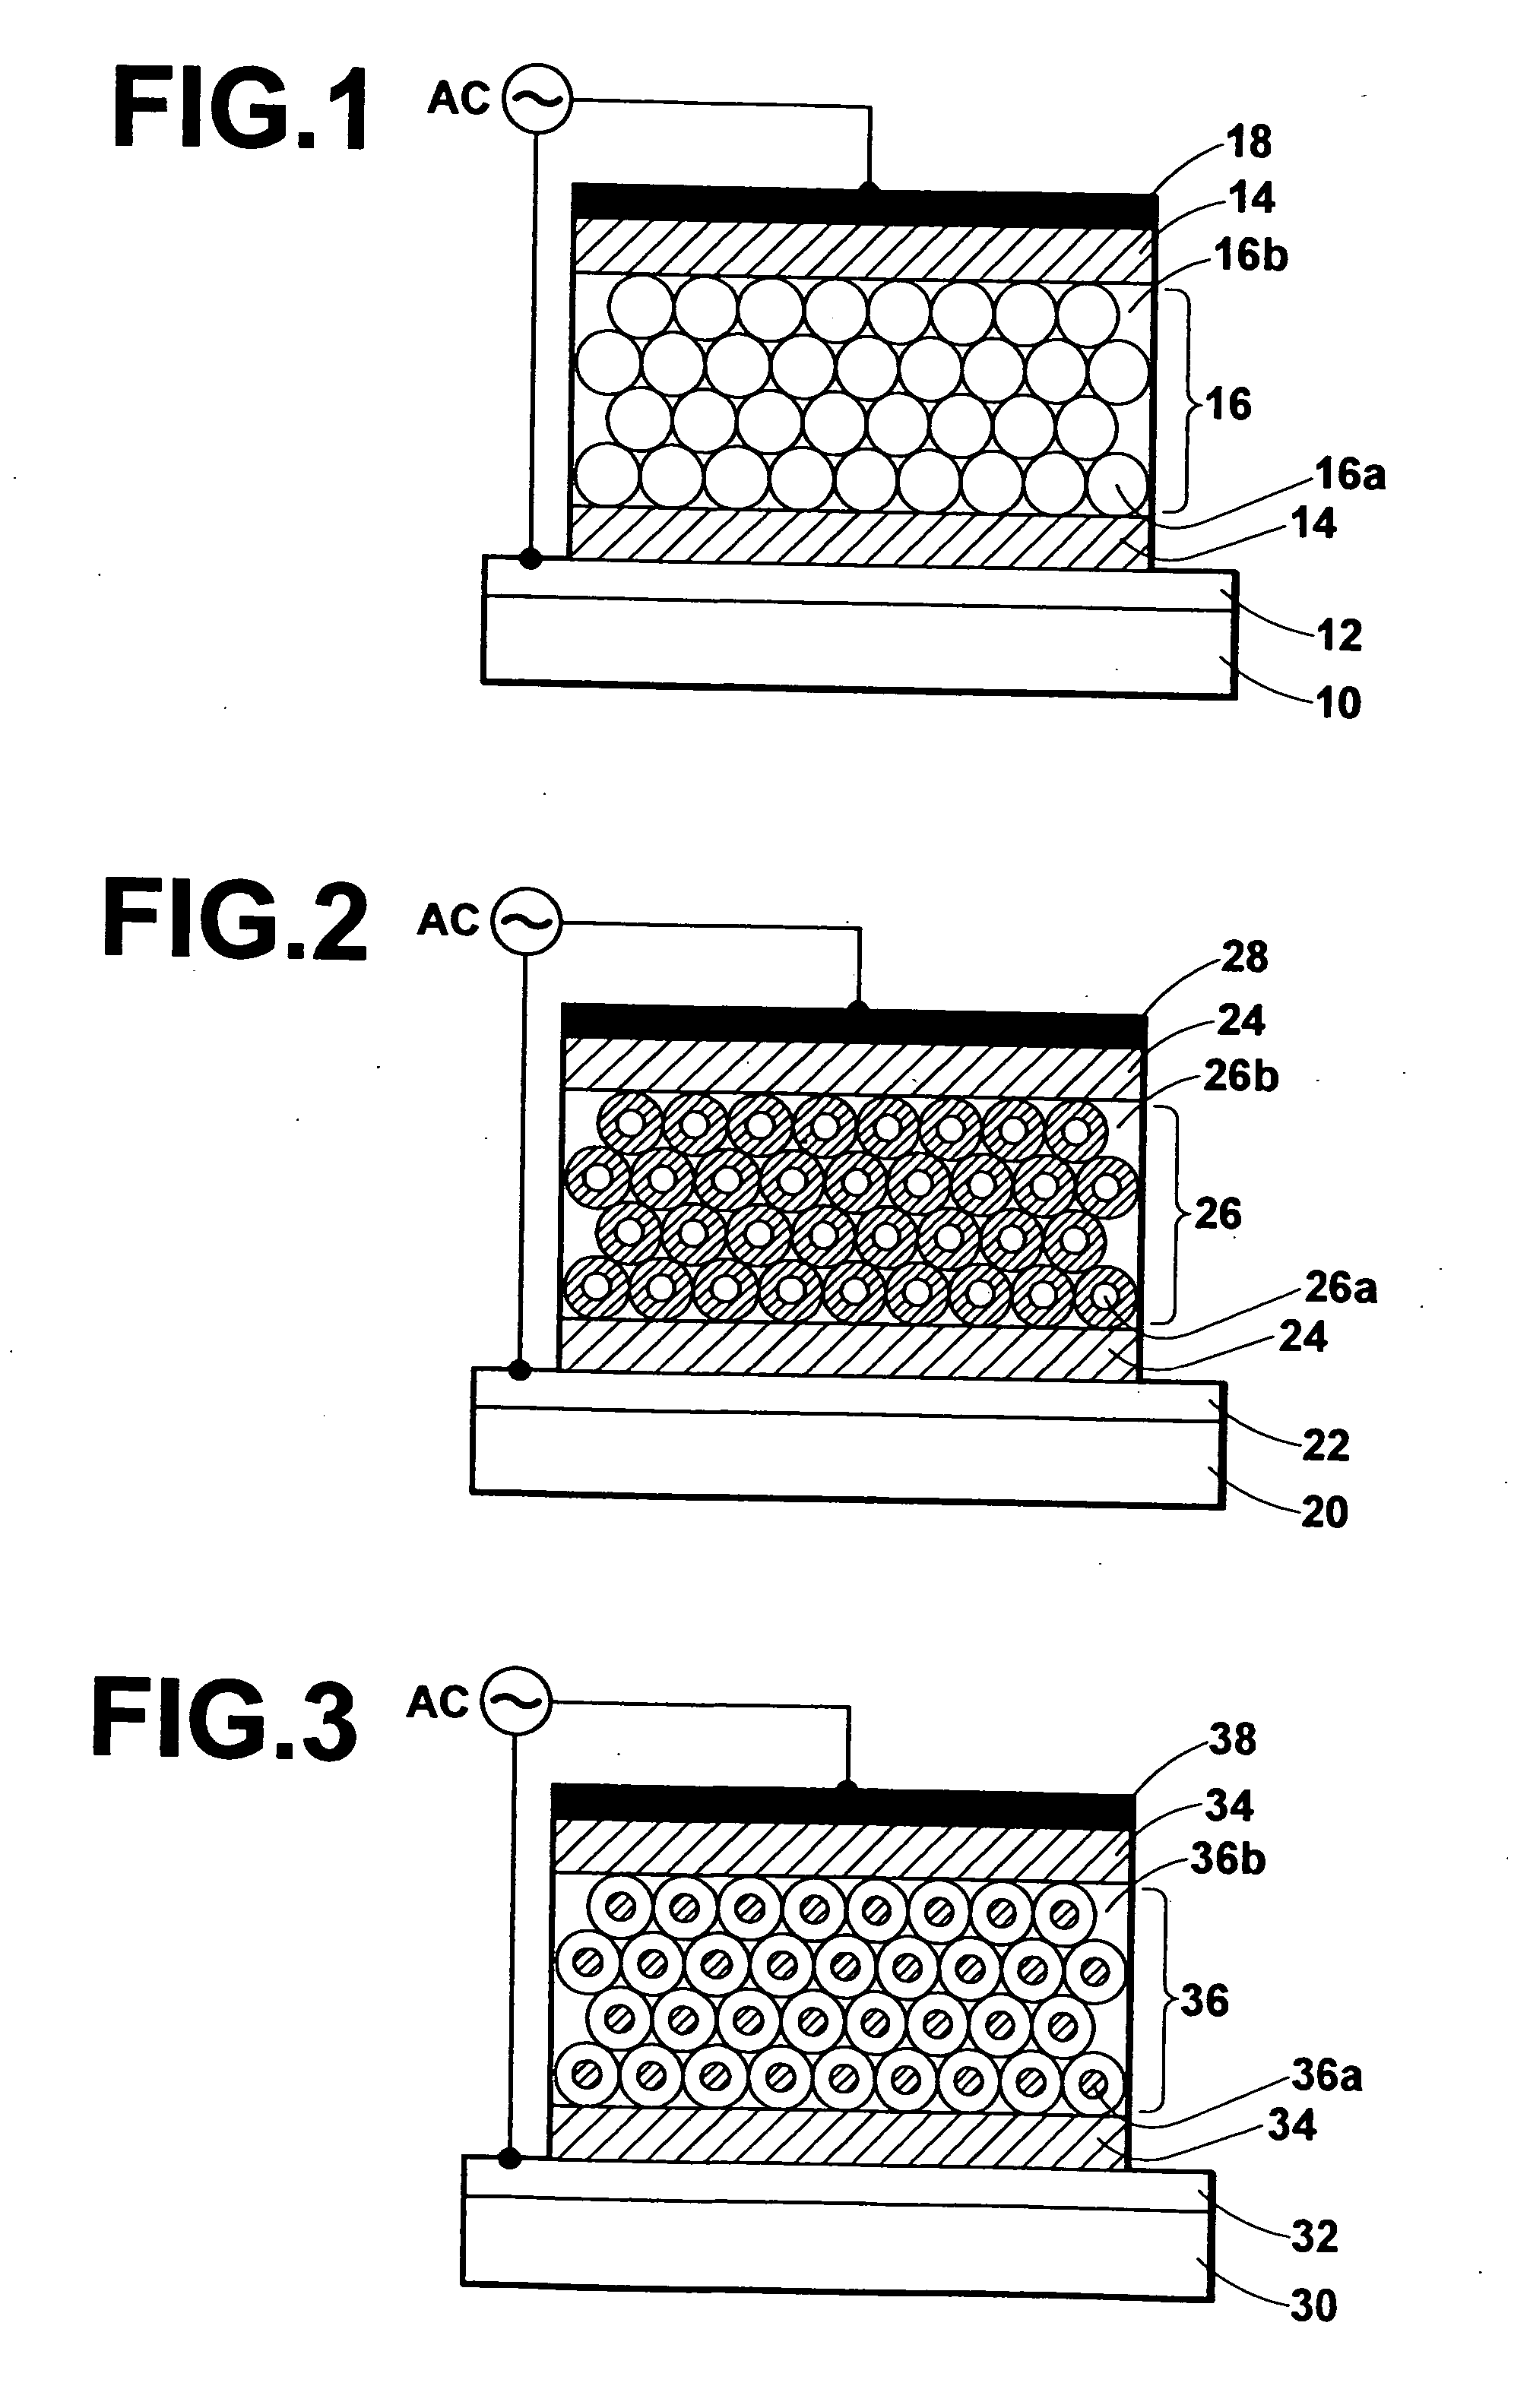 AC-driven electroluminescent element having light emission layer in which particles each containing fluorescent portion are densely arranged